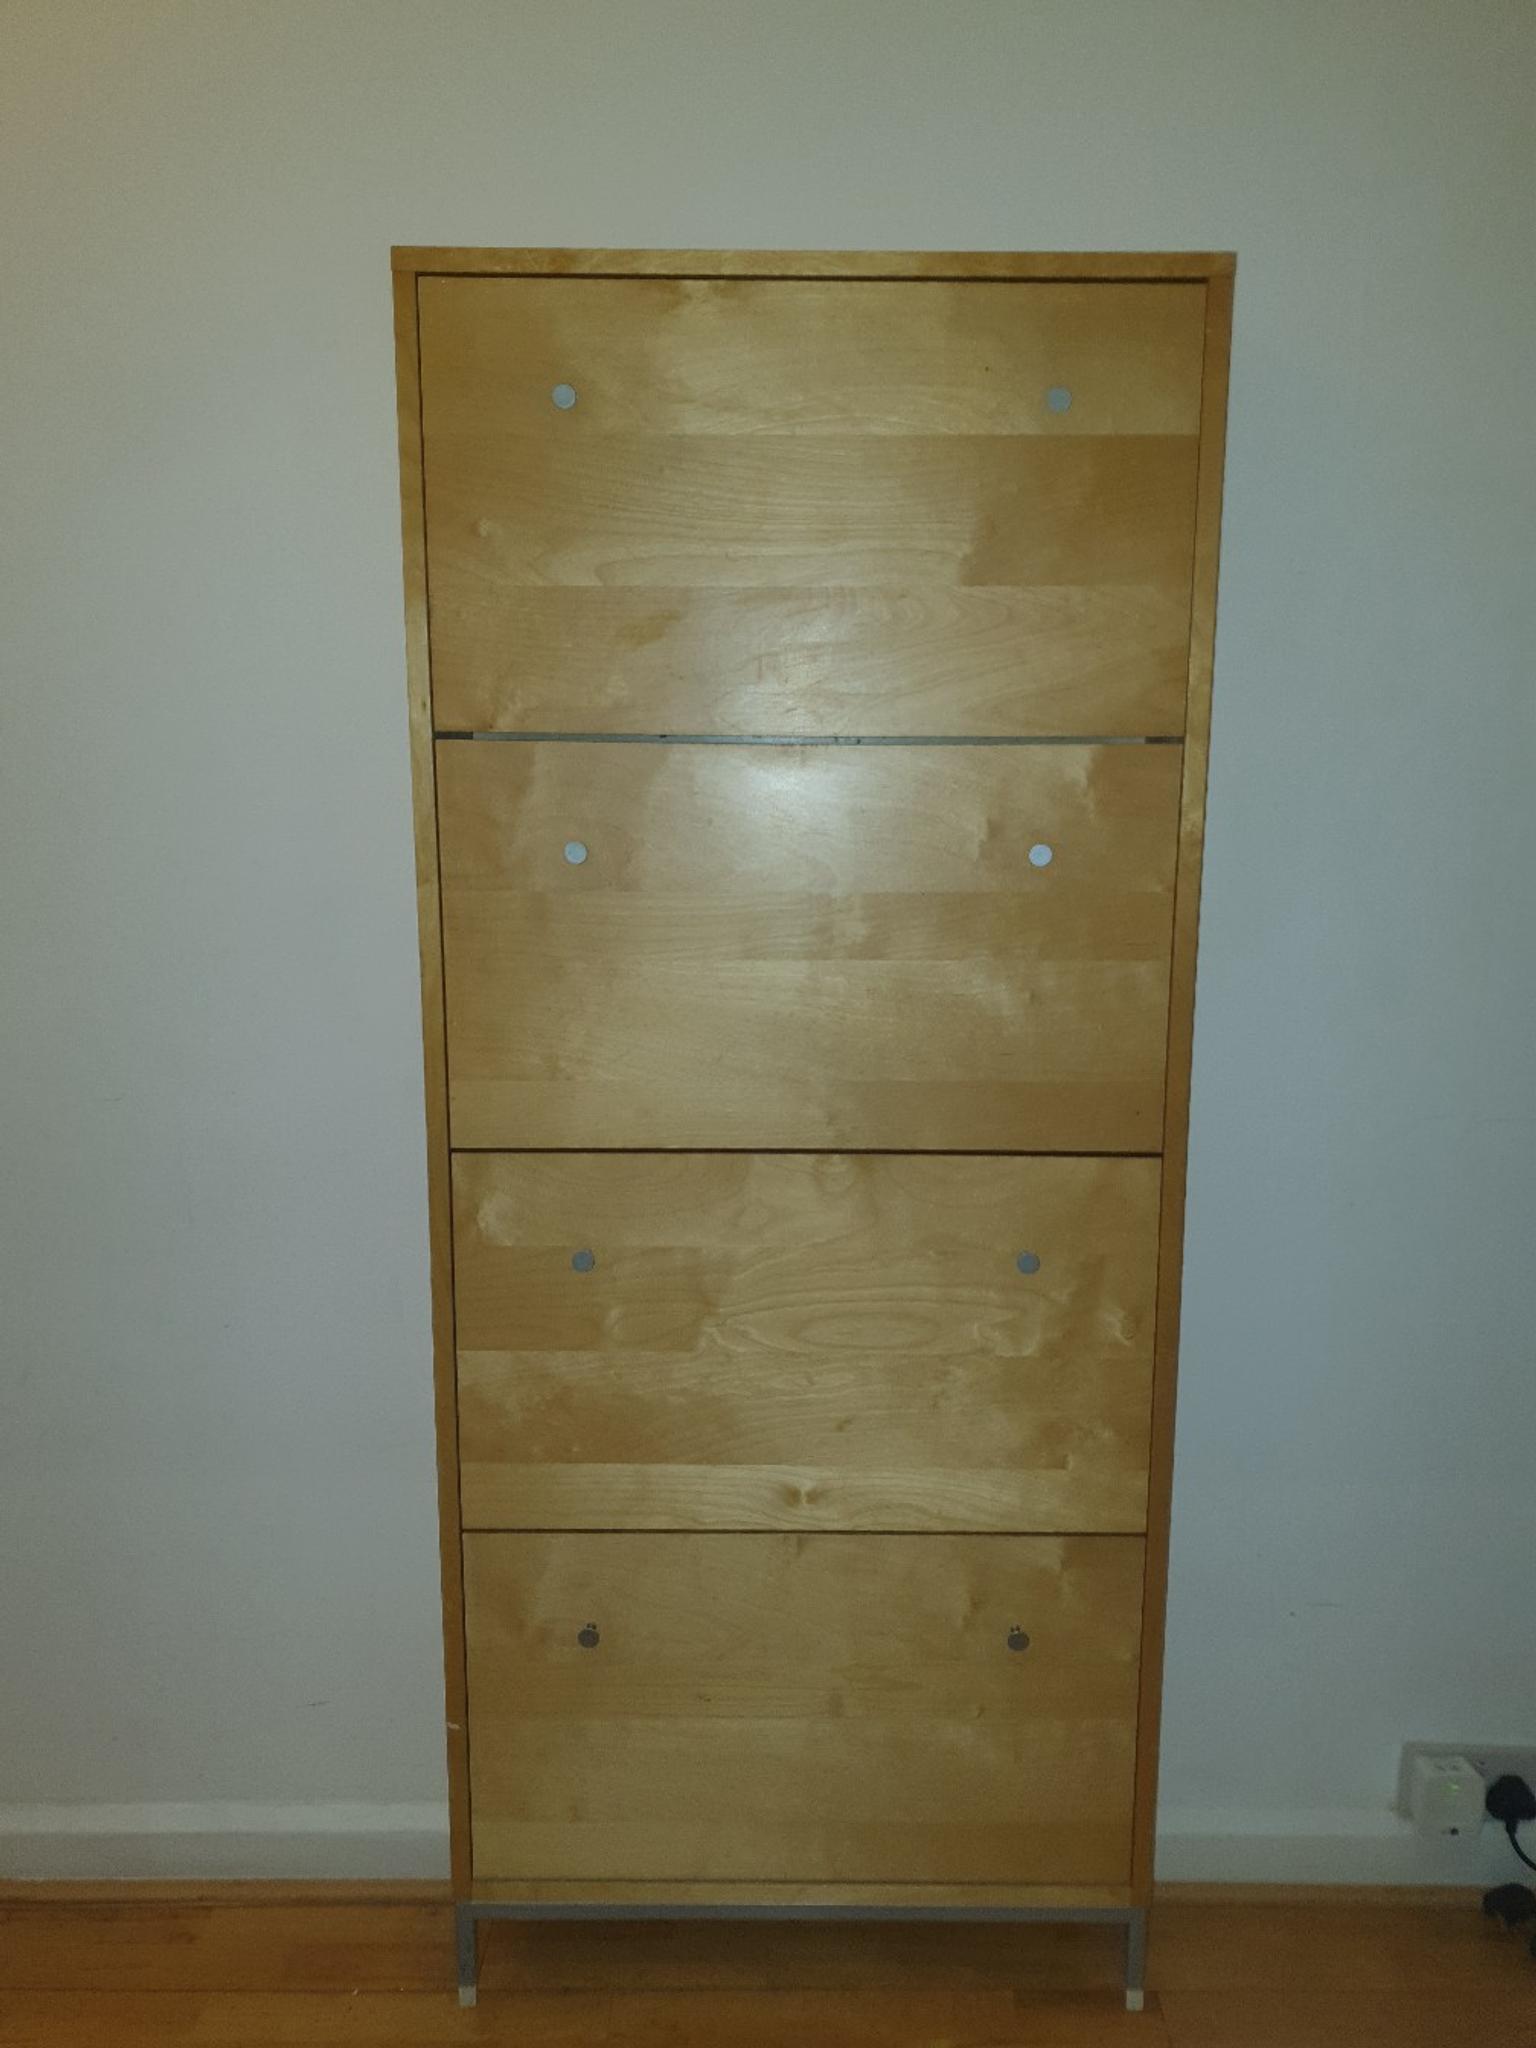 Ikea Shoe Cabinet In Nw11 London For 25 00 For Sale Shpock